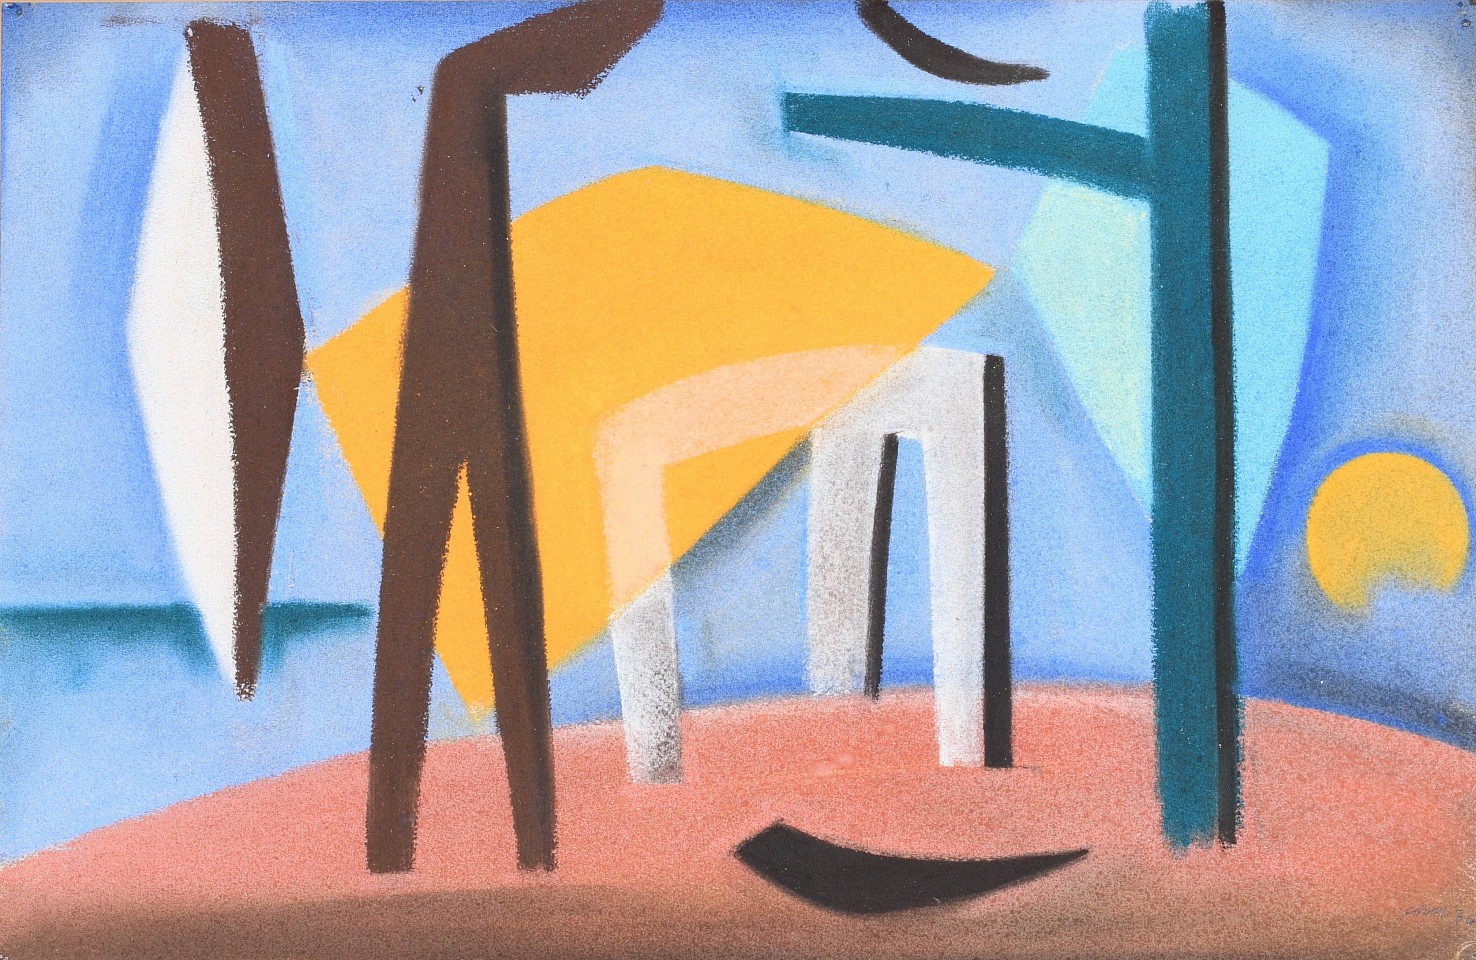 Carl Robert Holty, Untitled, 1936
Gouache on paper, 12 x 18 1/2 in.
HOL002